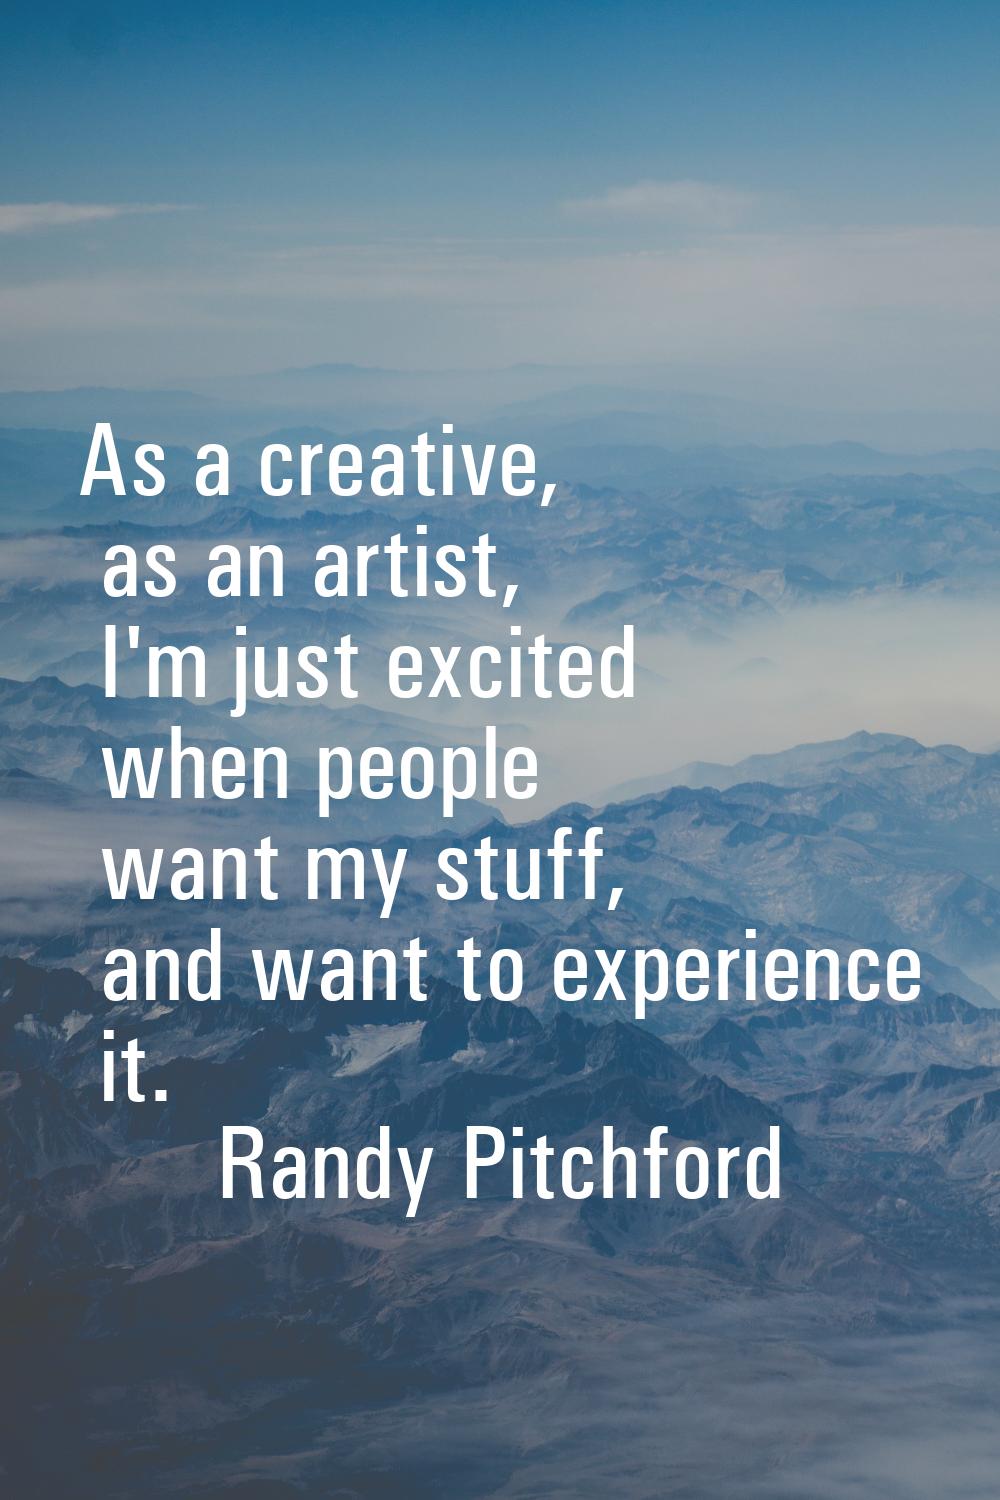 As a creative, as an artist, I'm just excited when people want my stuff, and want to experience it.